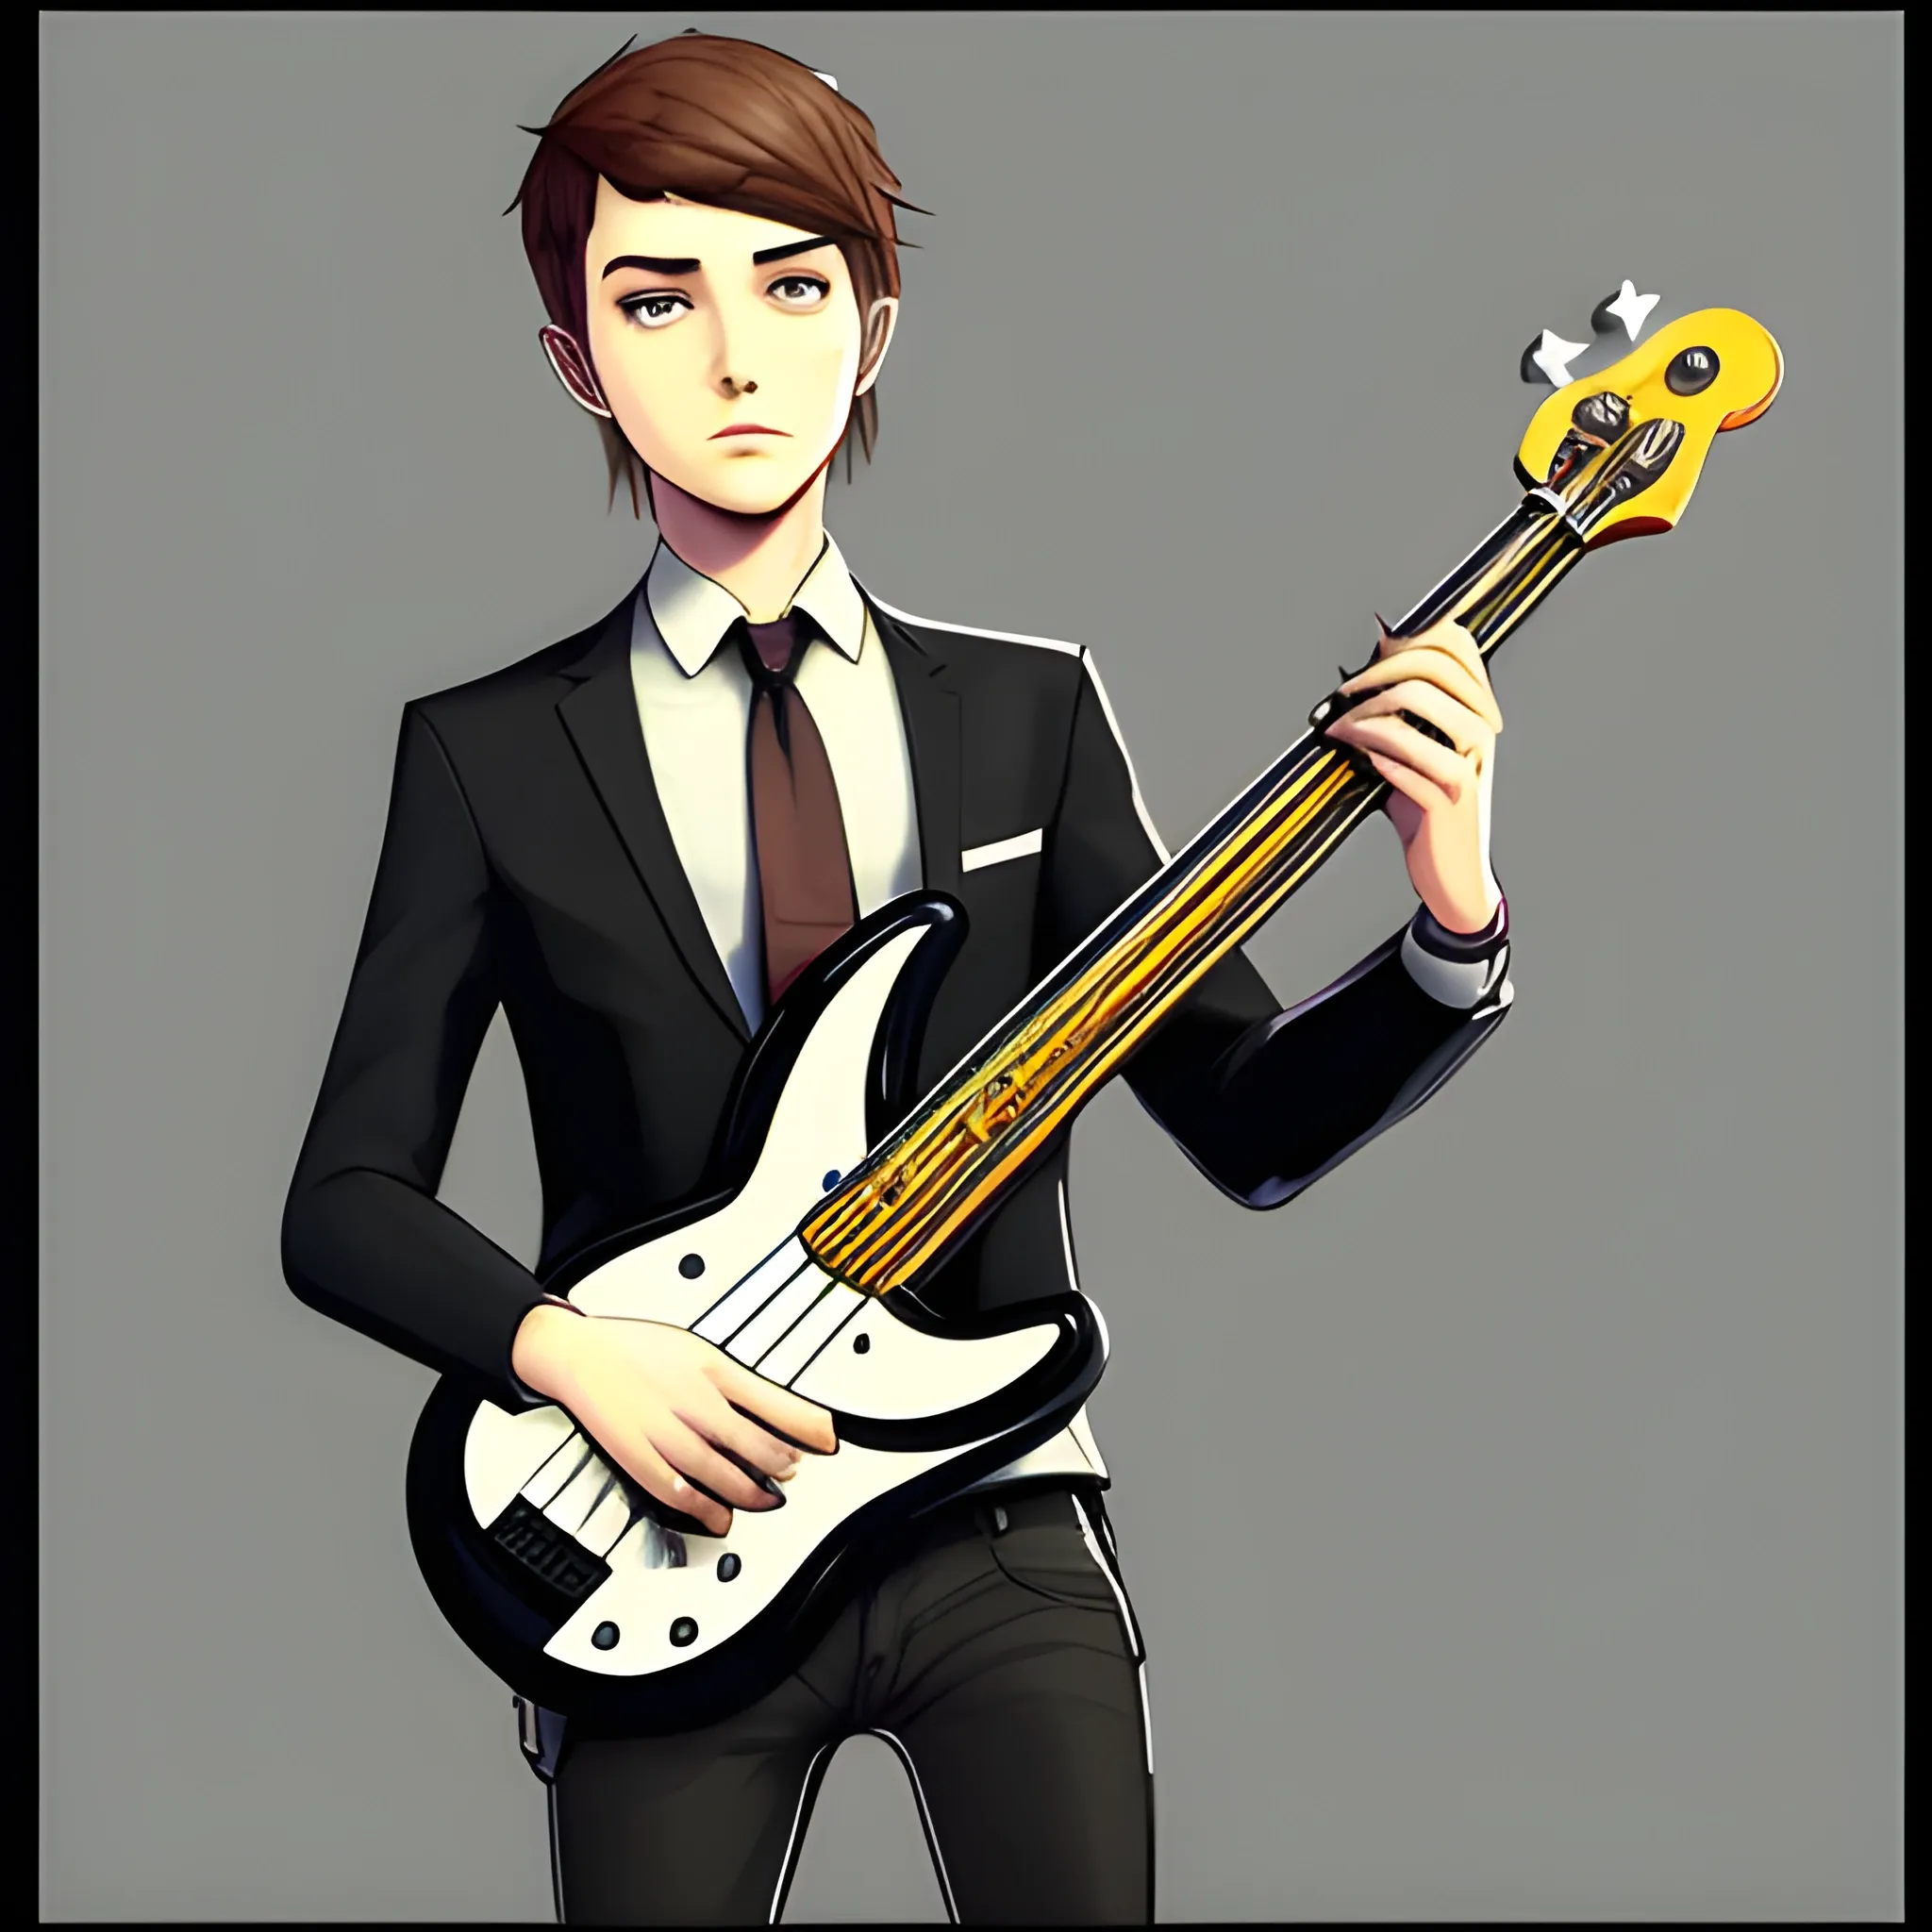 A guy with a bass guitar in a black skinny tie. A picture in the style of the game Life is strange, Anime, Cartoon